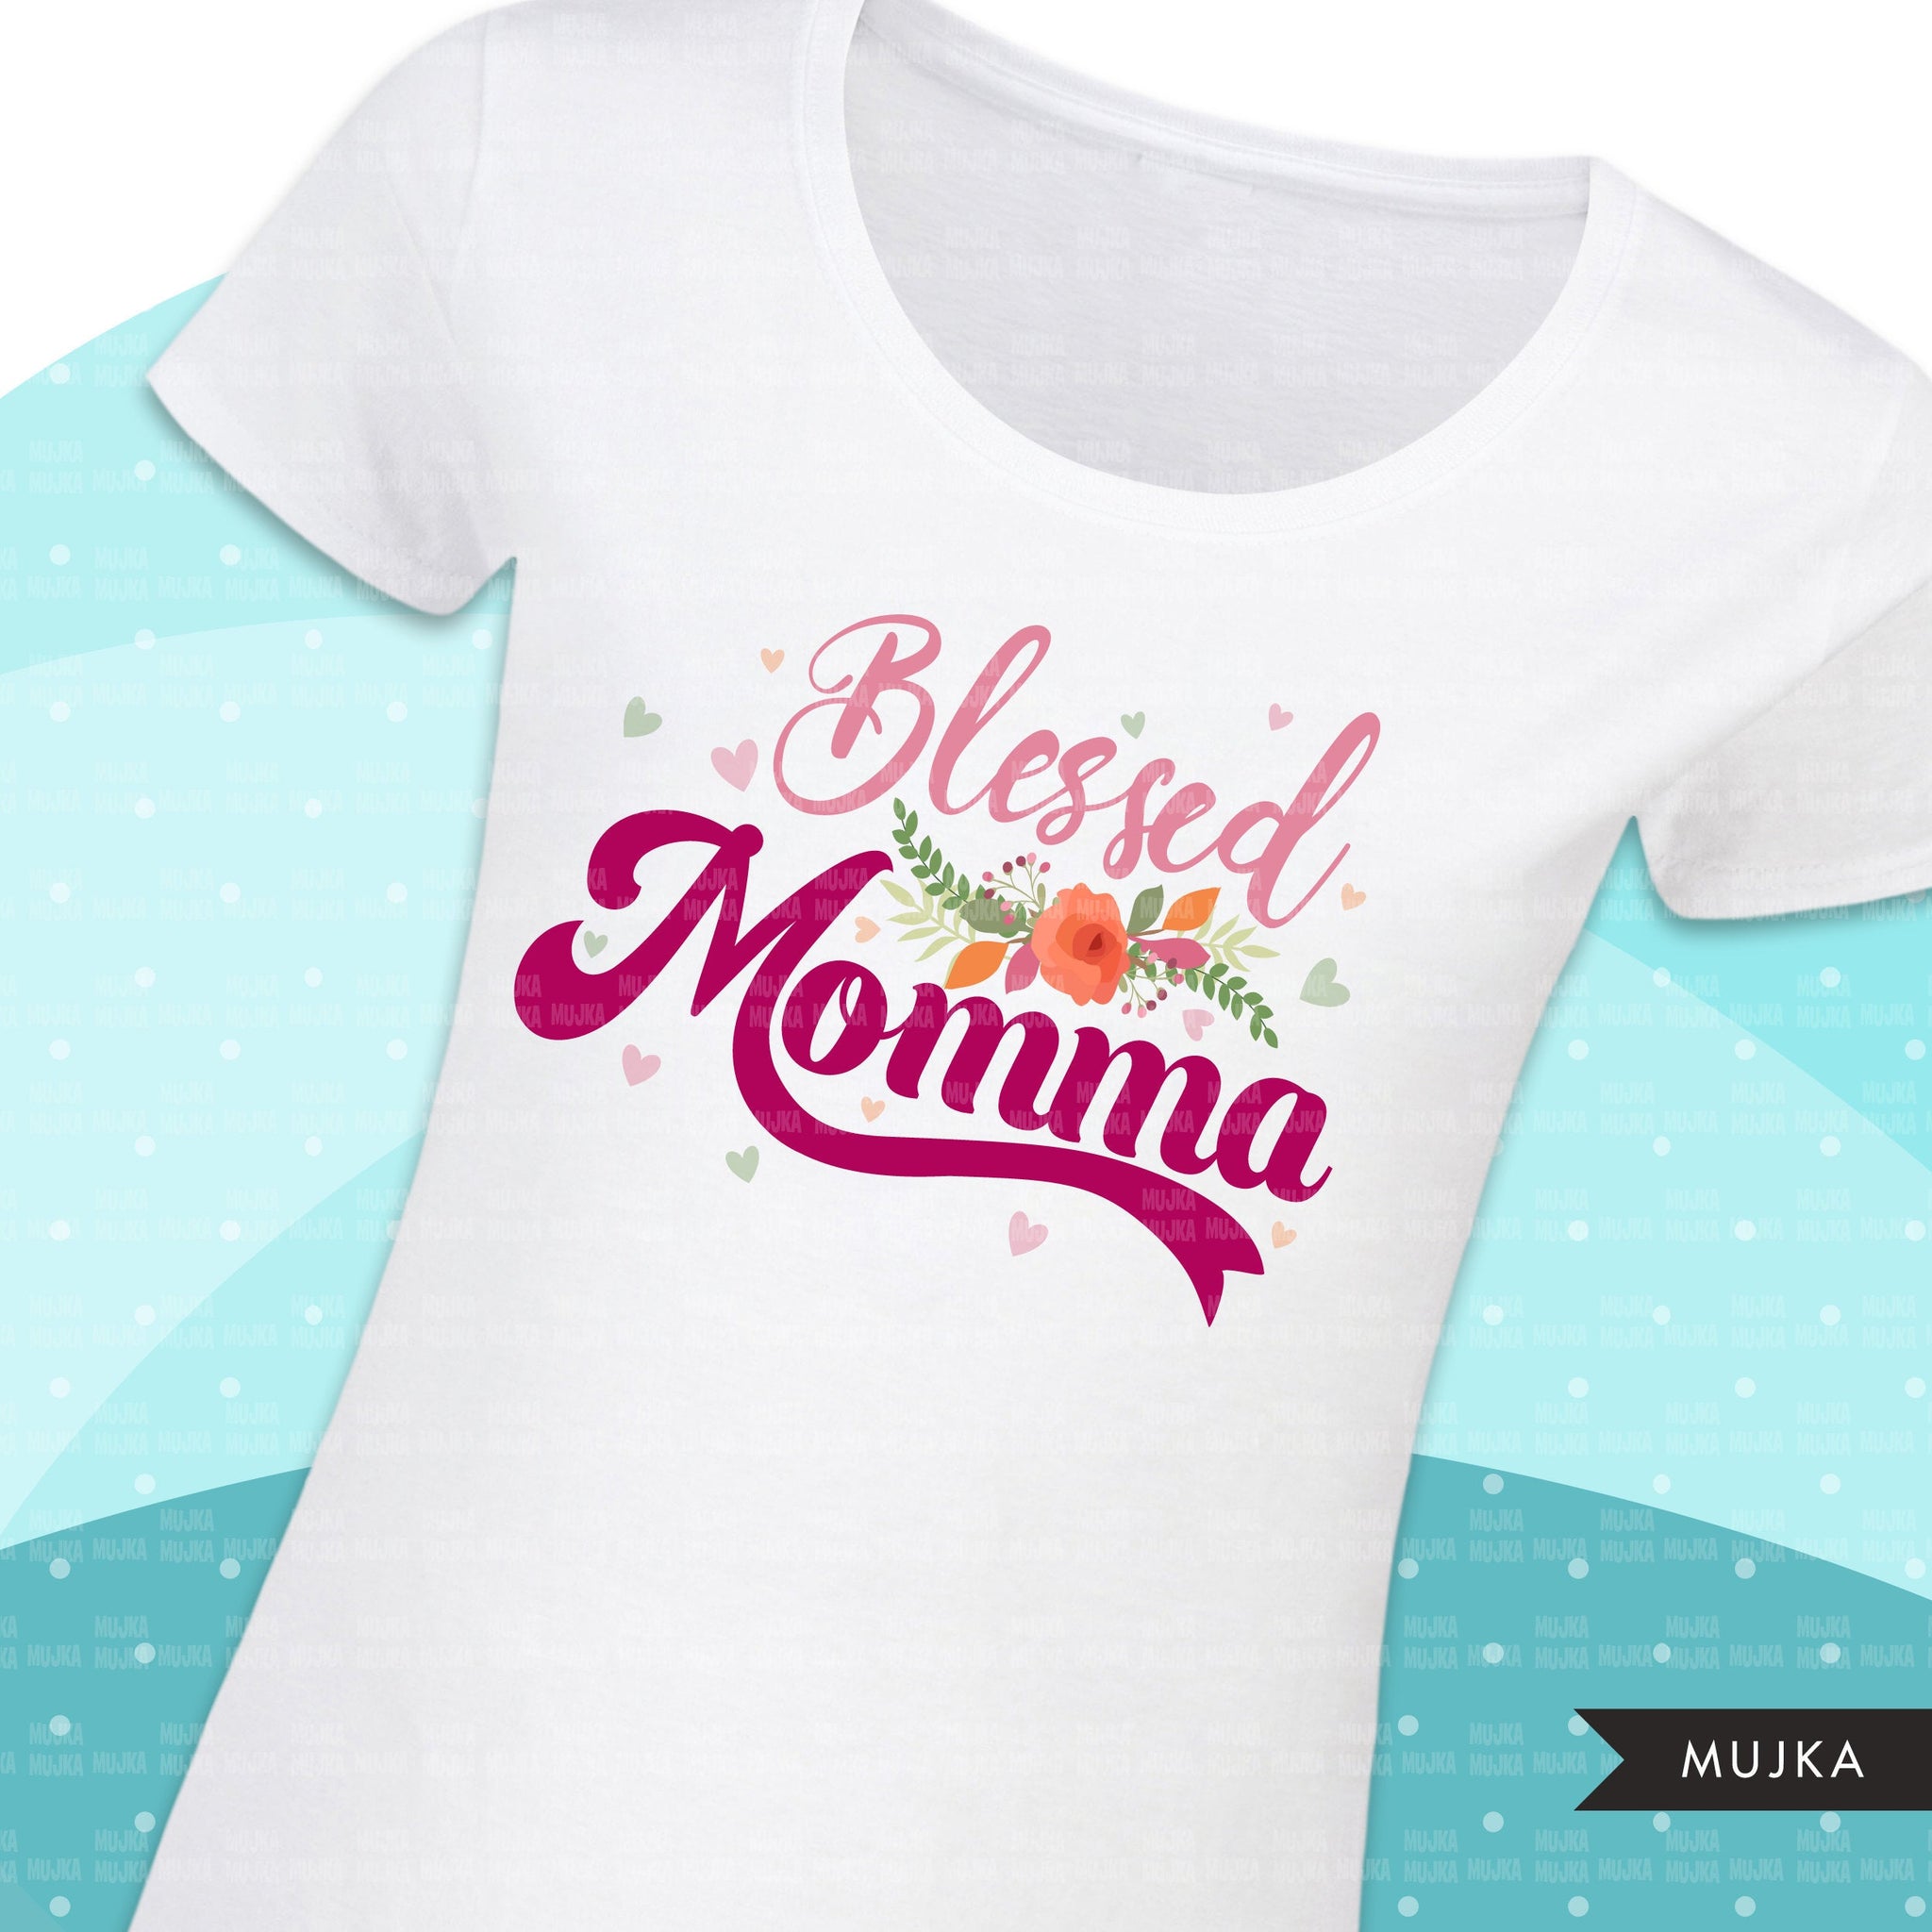 Blessed Momma clipart, blessed mom sublimation designs digital download, blessed mom Shirt designs, mothers day designs for cricut downloads